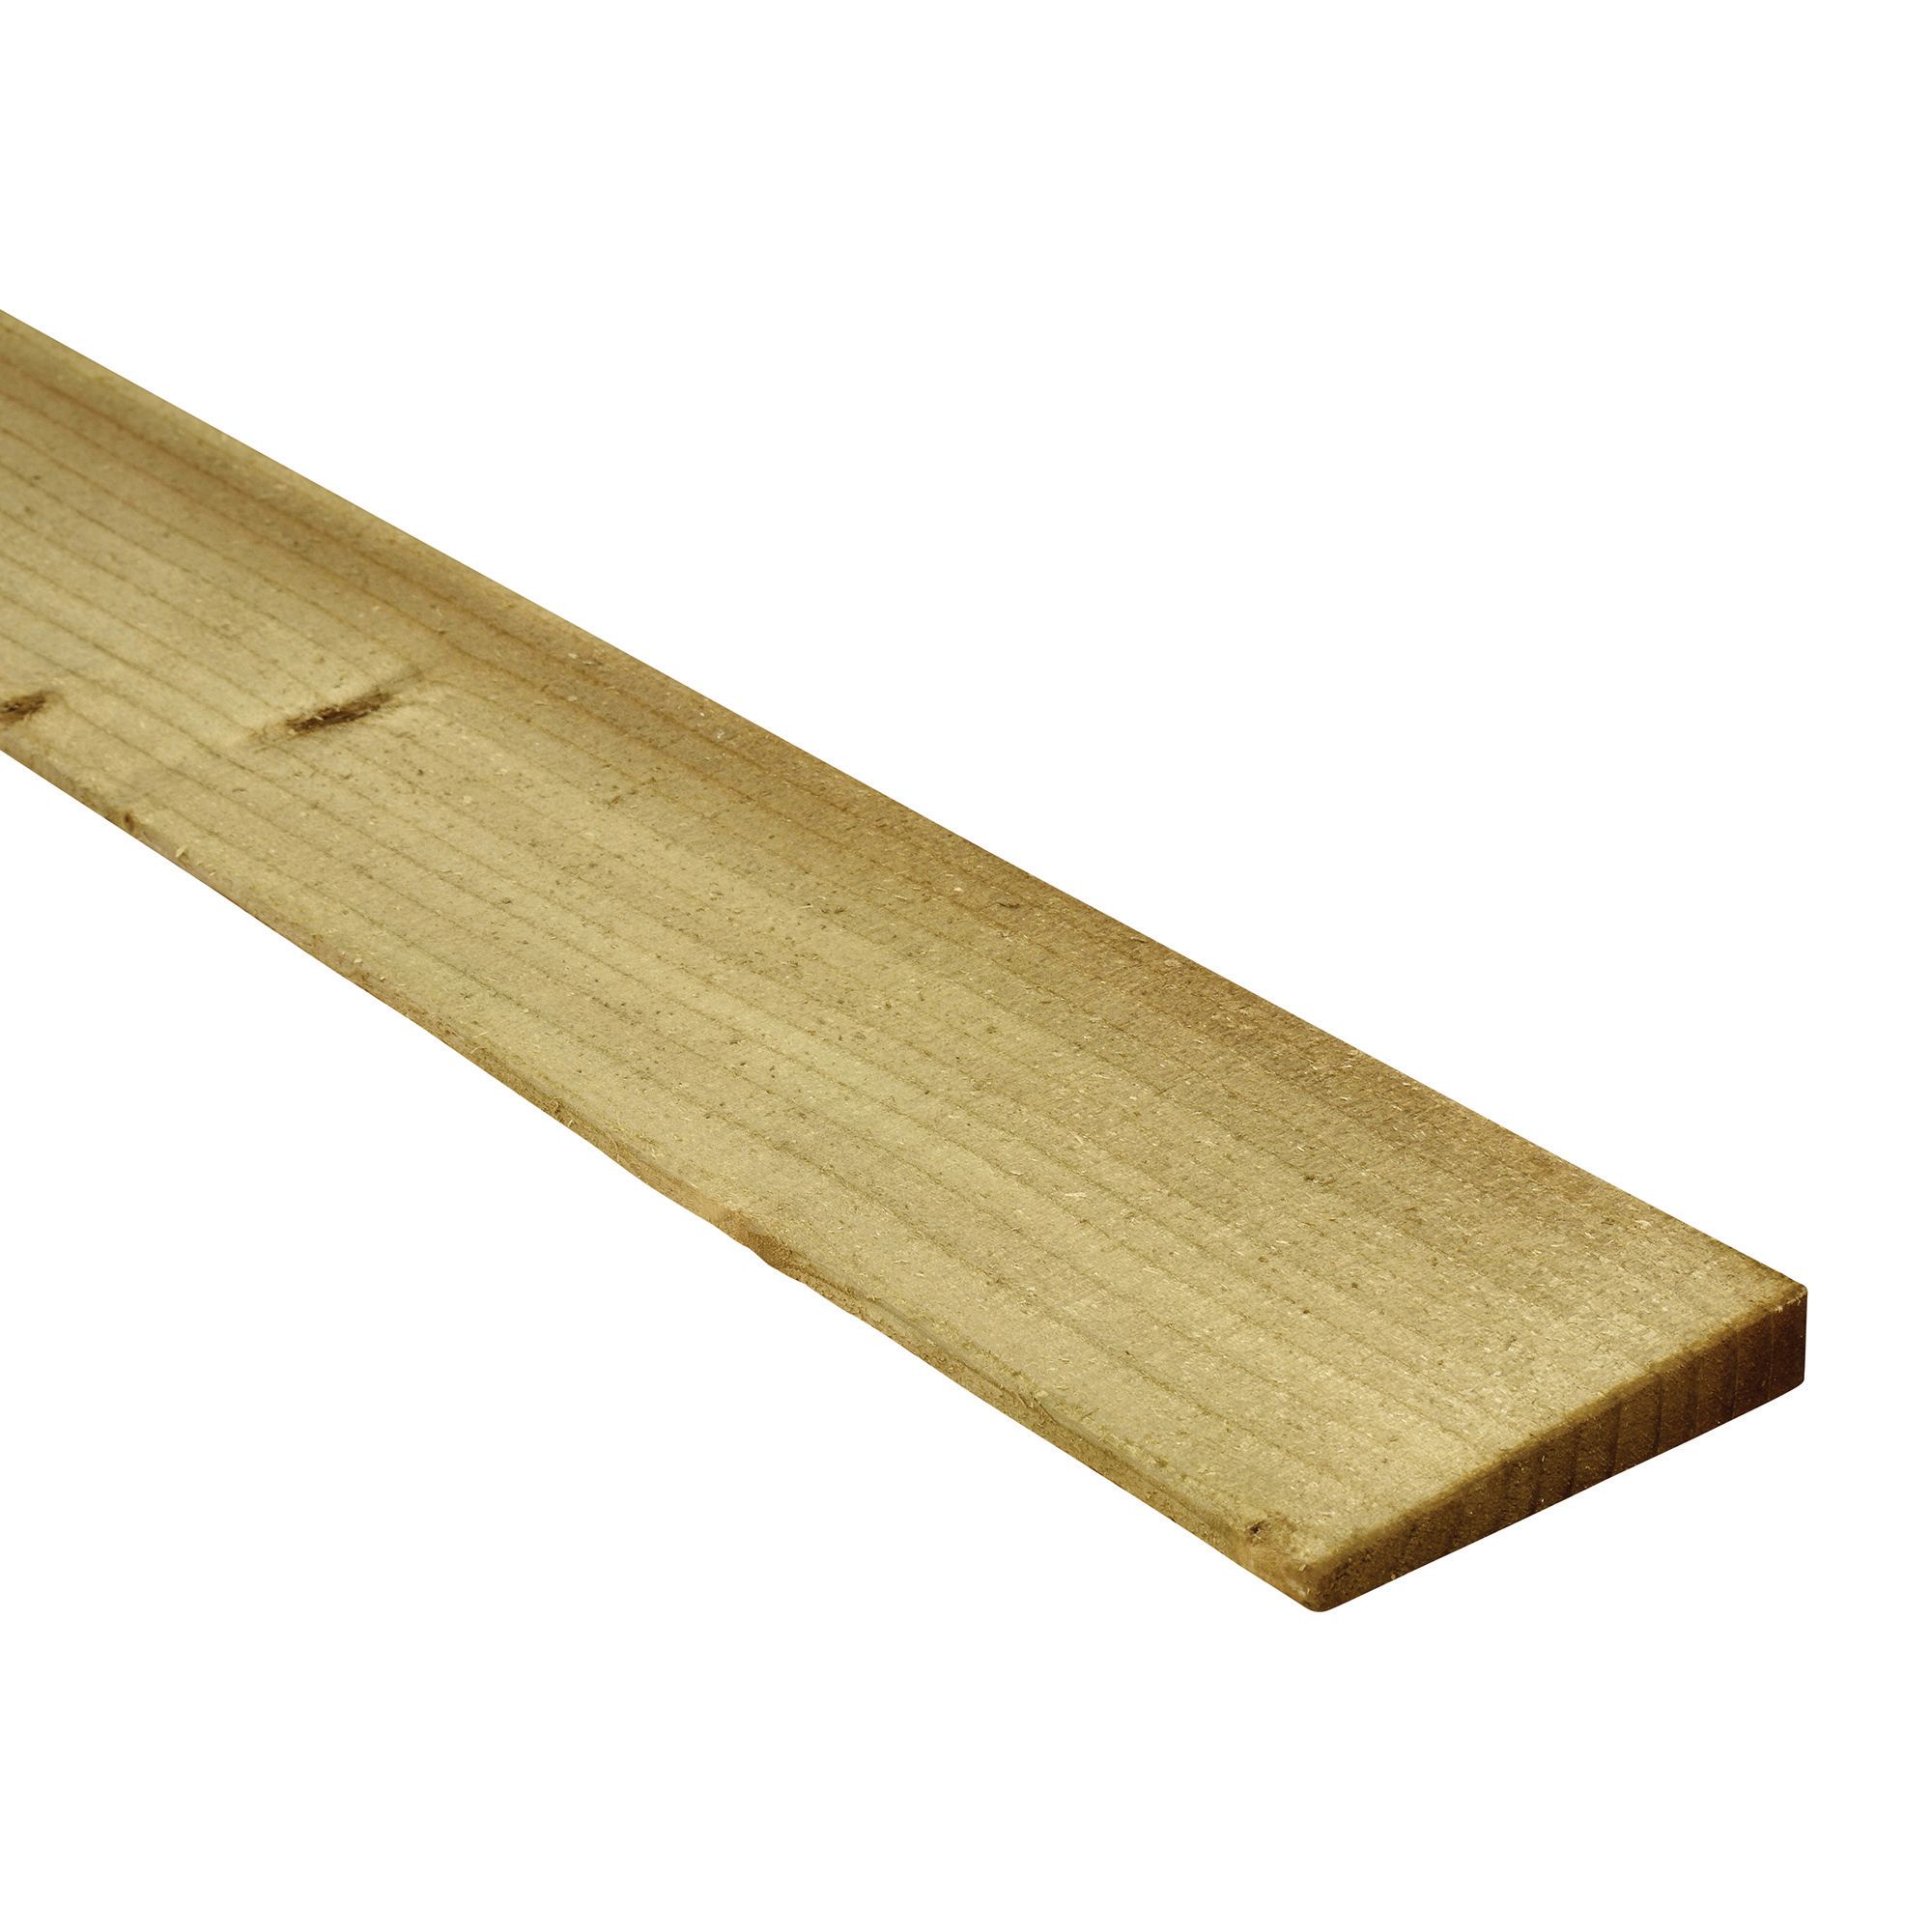 Image of Wickes Feather Edge Fence Board - 100 x 11mm x 2.4m